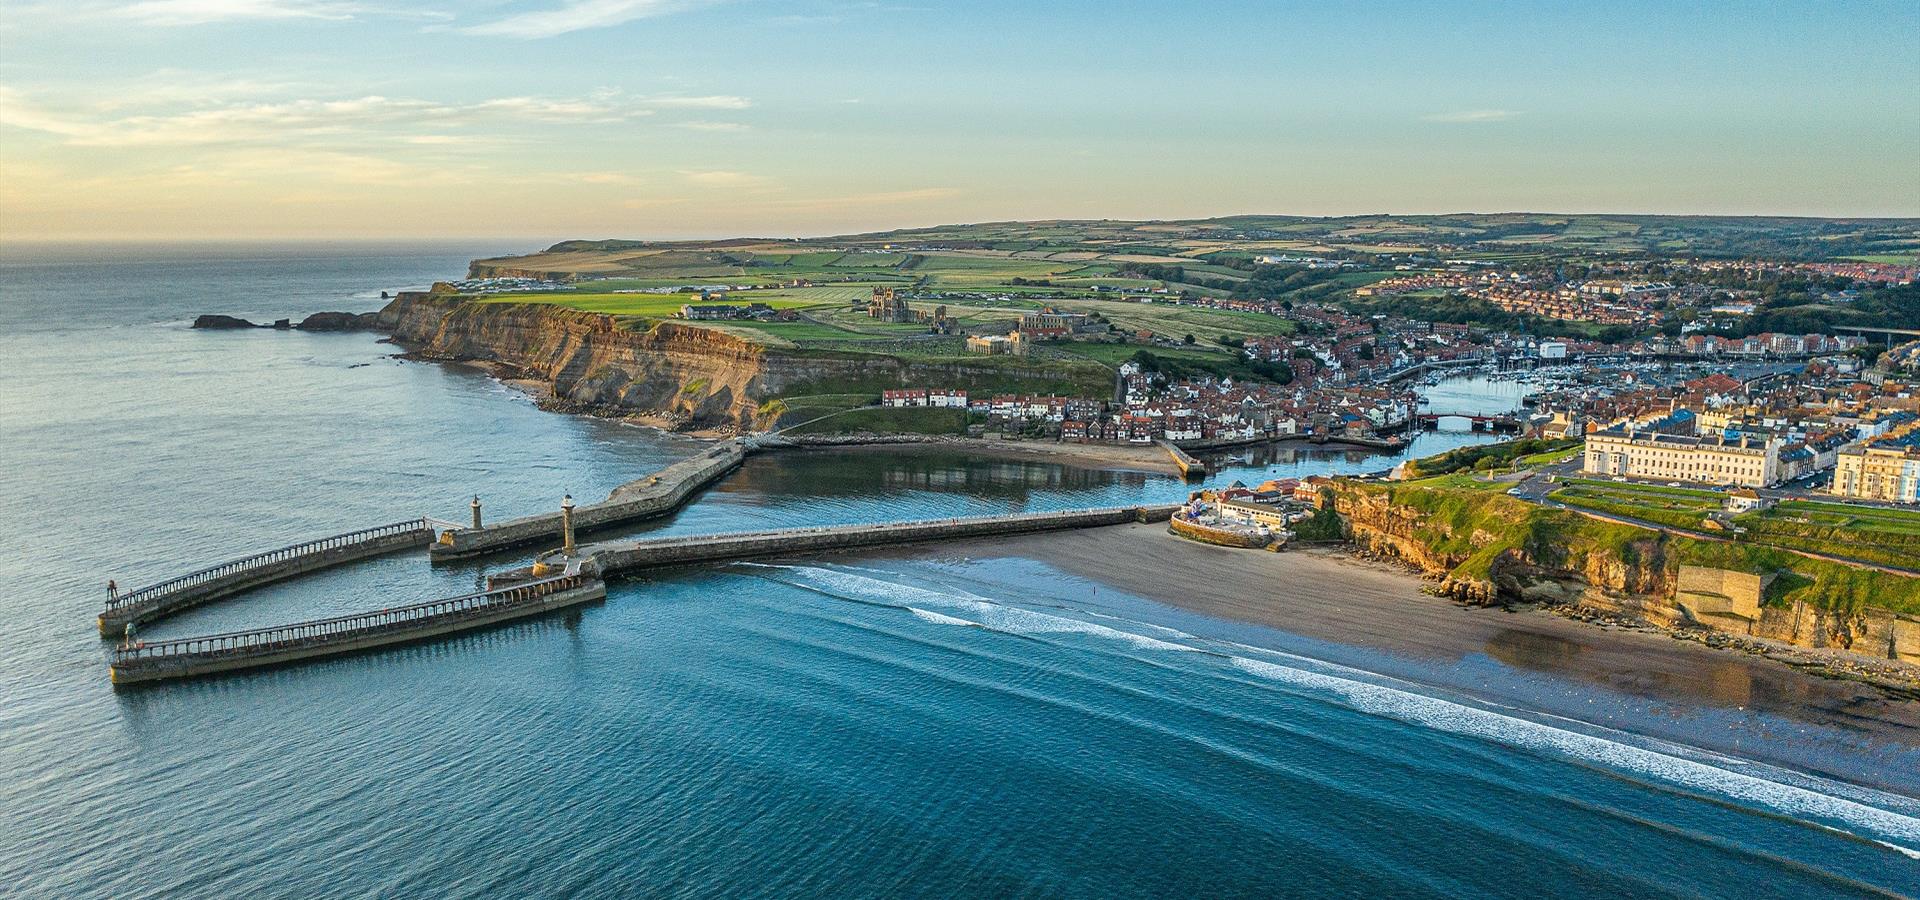 Whitby - Discover Yorkshire Coast